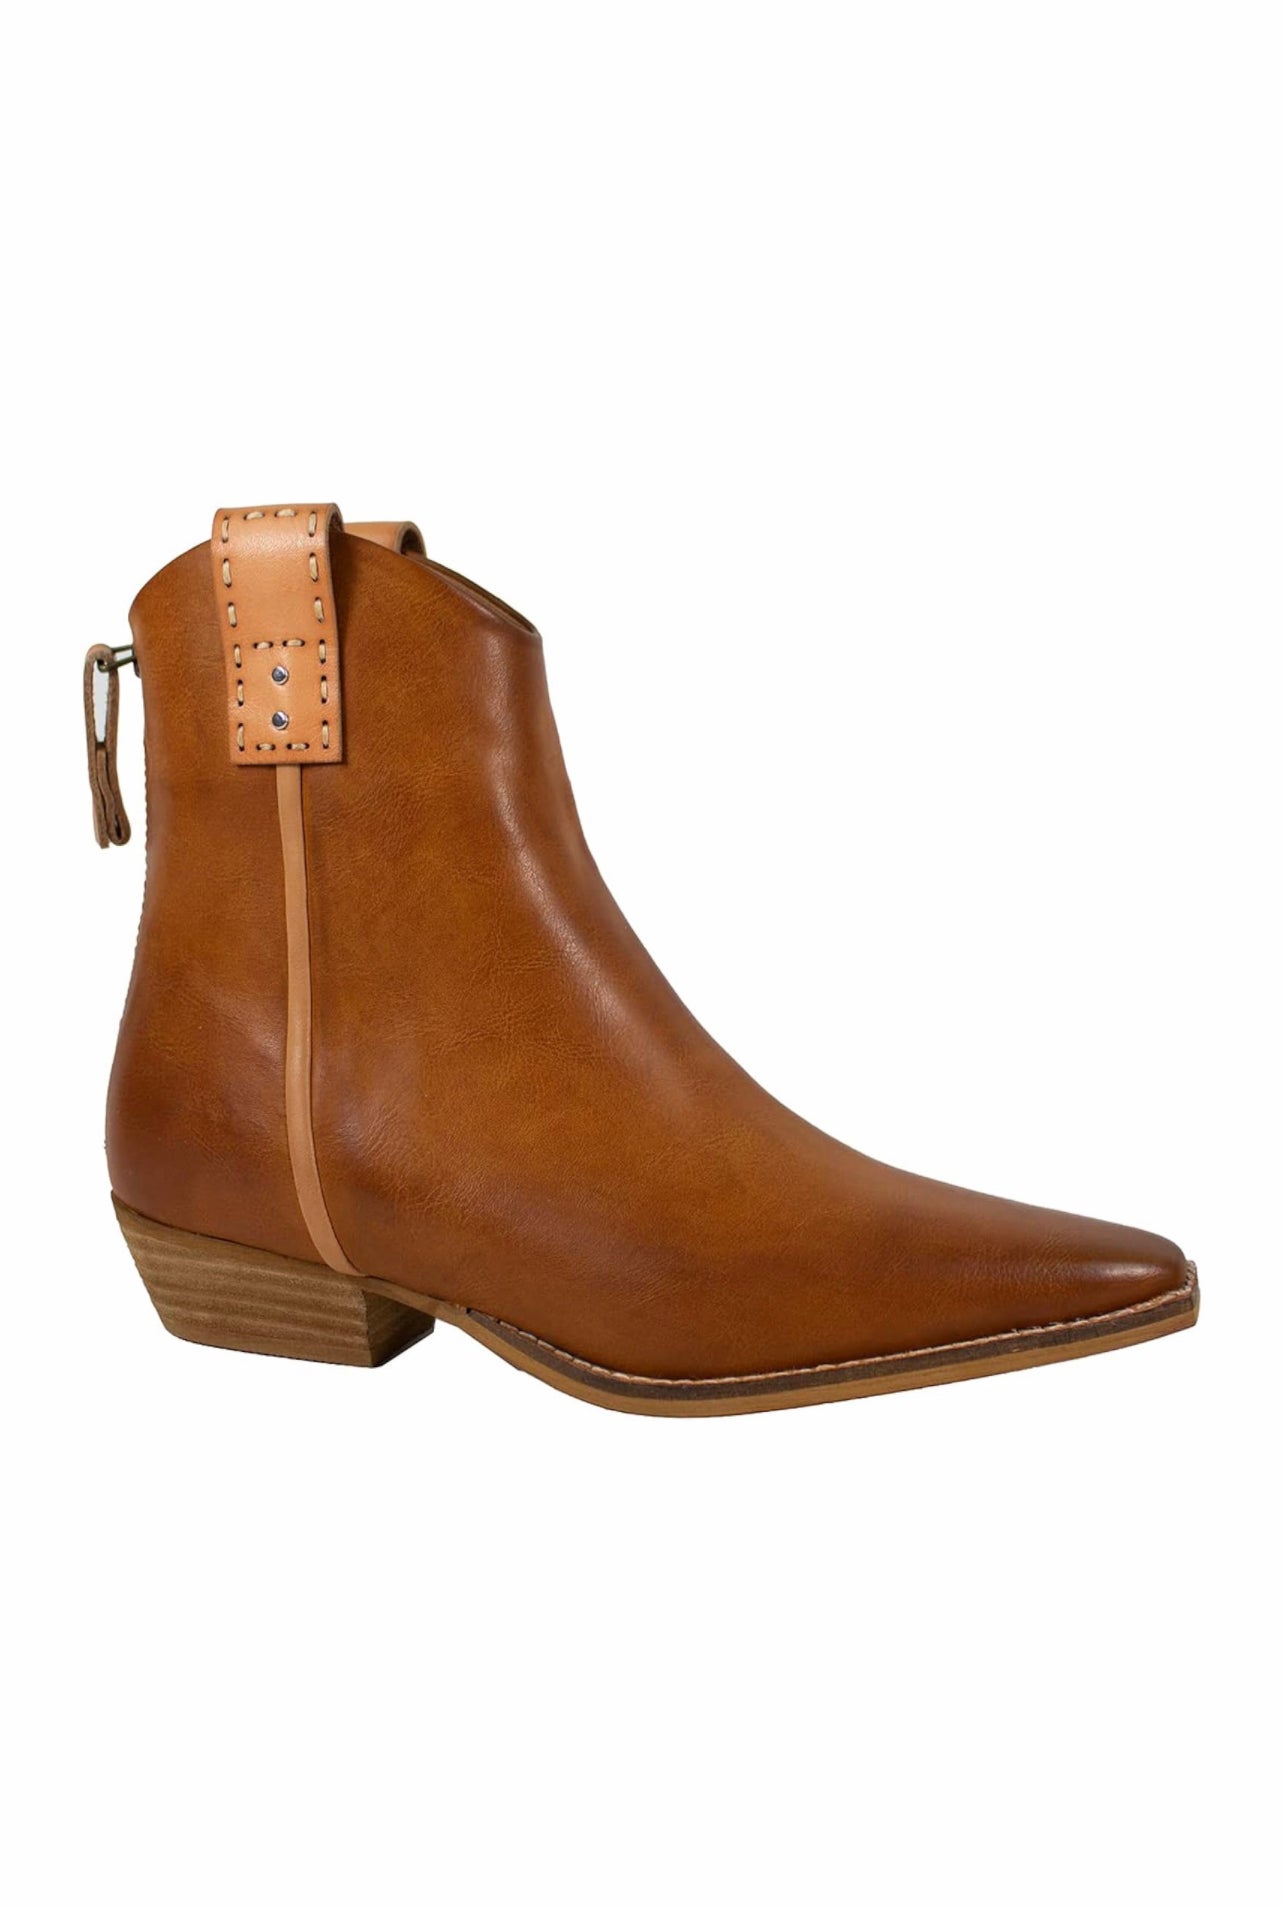 Free reign ankle boot brown